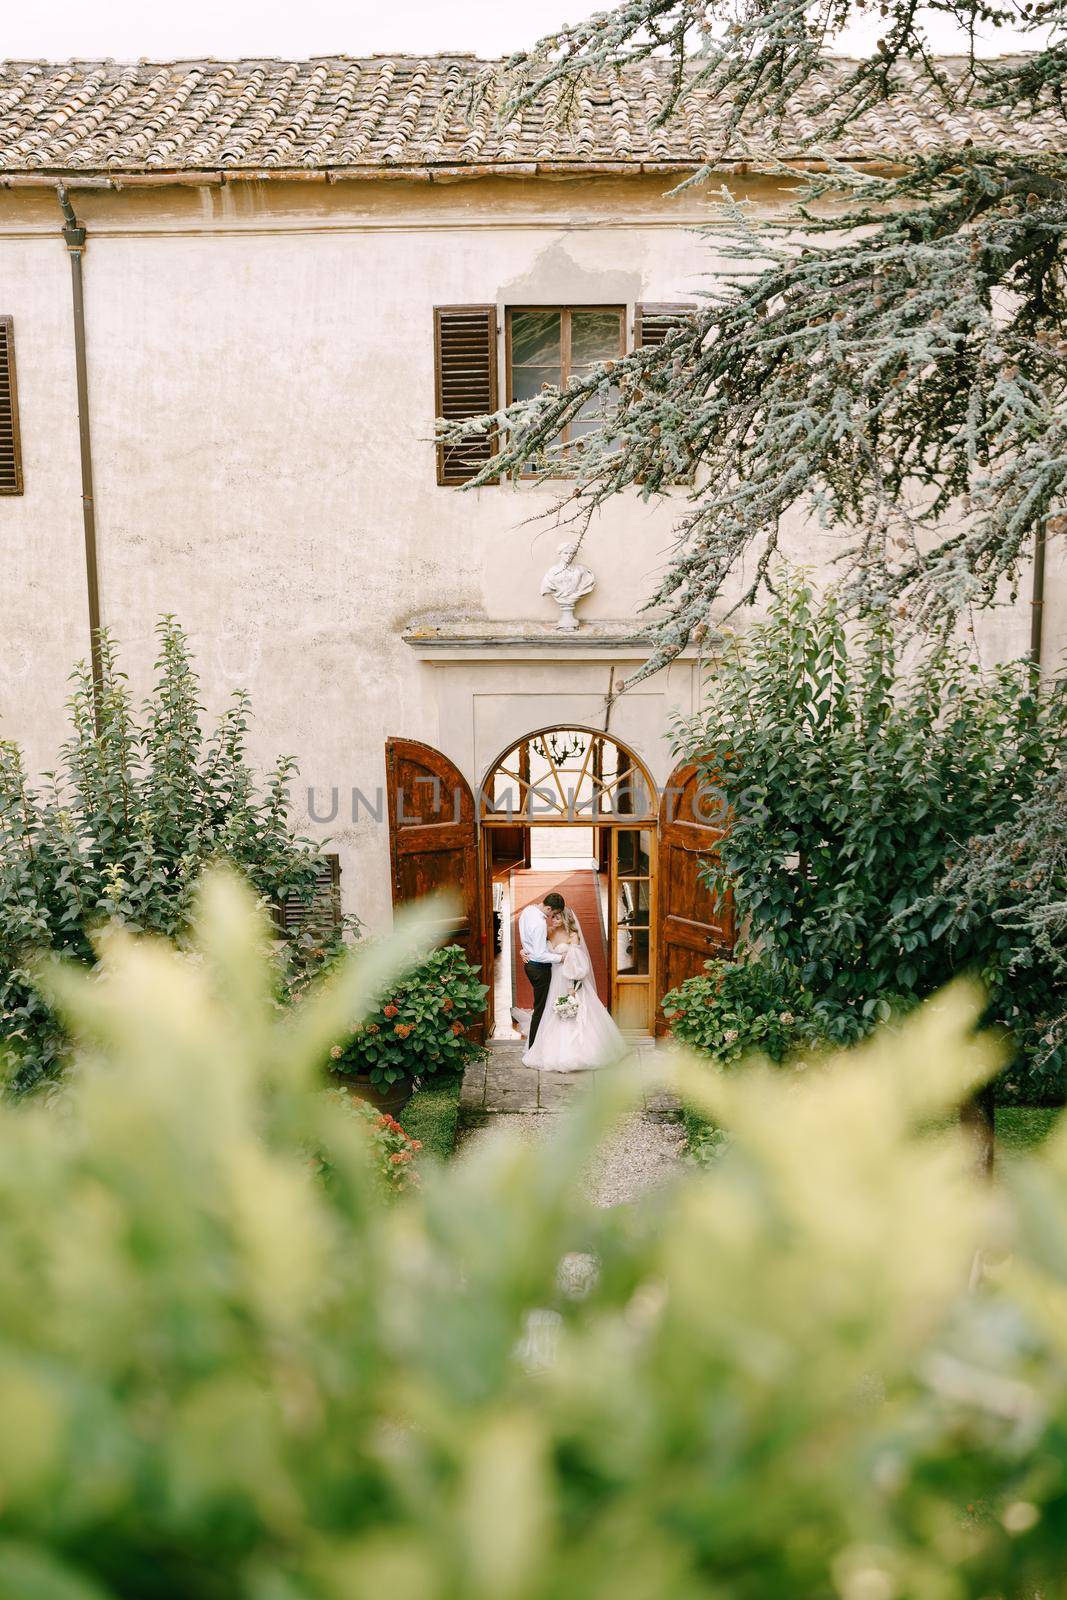 Wedding at an old winery villa in Tuscany, Italy. A wedding couple is standing near the old wooden doors in the villa-winery. by Nadtochiy